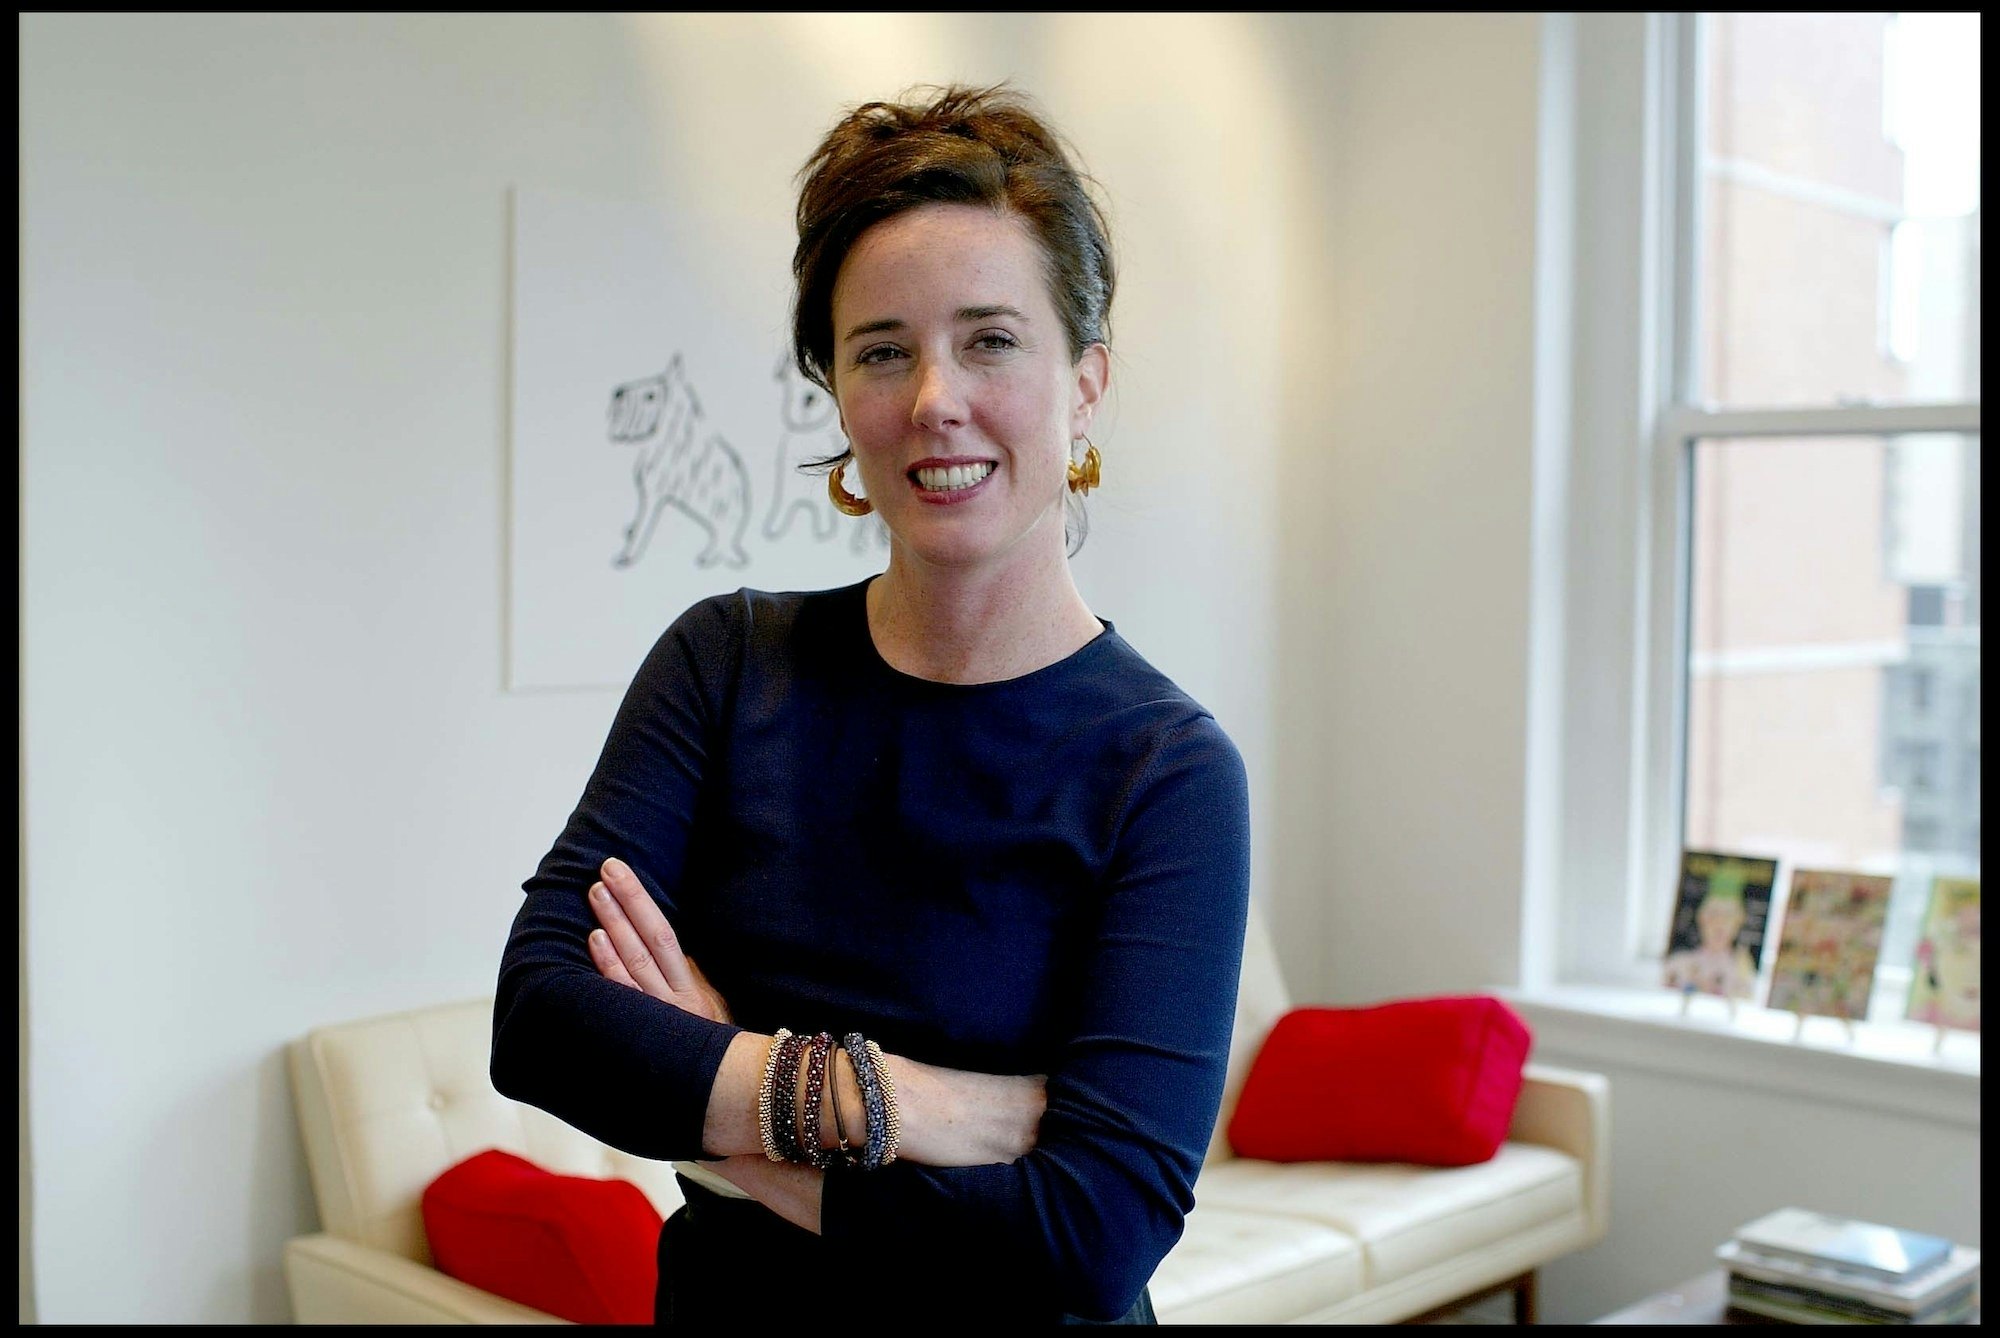 Designer Kate Spade Is Survived by Her Husband and 13-Year-Old Daughter